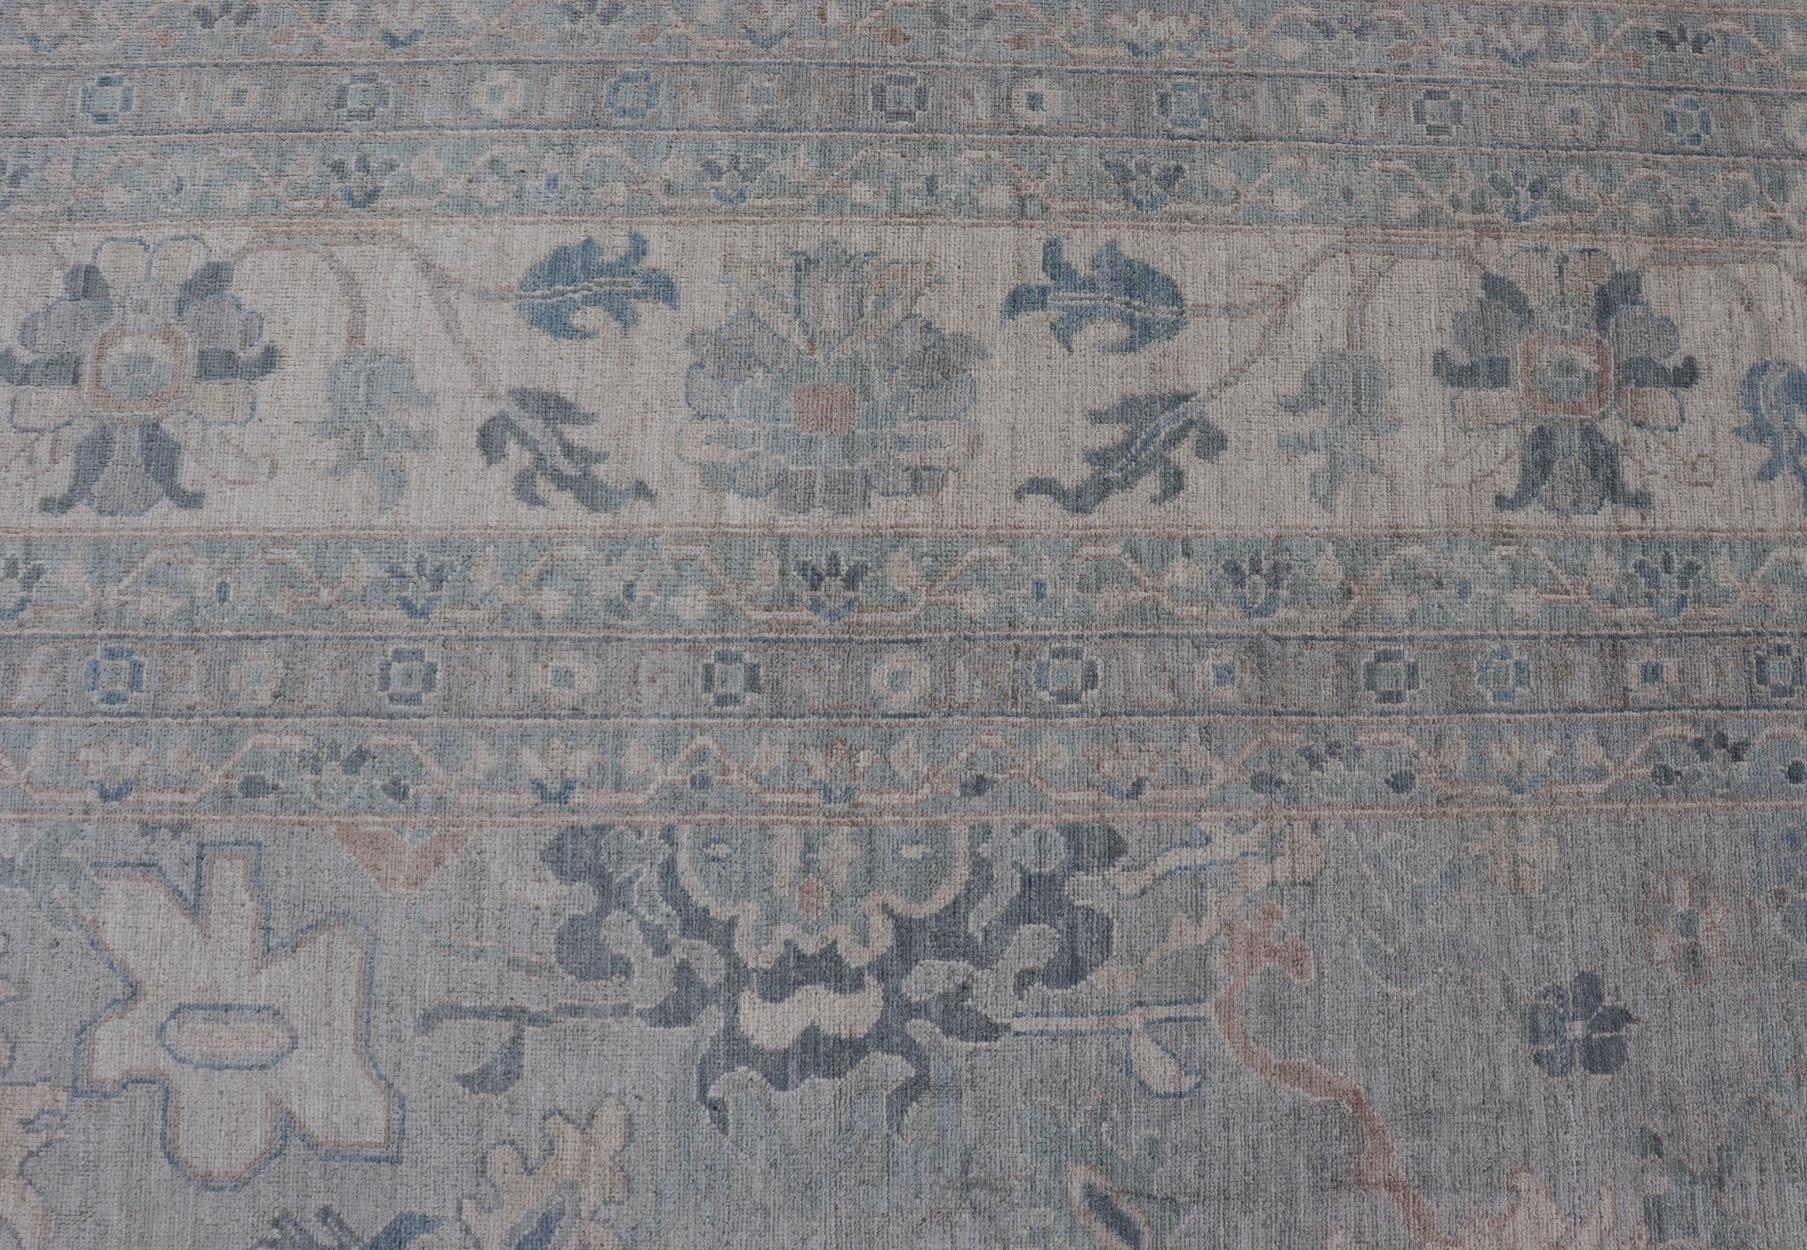 Very Large Modern Afghan Oushak rug with soft floral motifs on light gray background. Keivan Woven Arts; rug AWR-556 Country of Origin: Afghanistan Type: Oushak Design: Floral, 

Measures: 13'10 x 19'5 

This grandiose Oushak features a wide border,